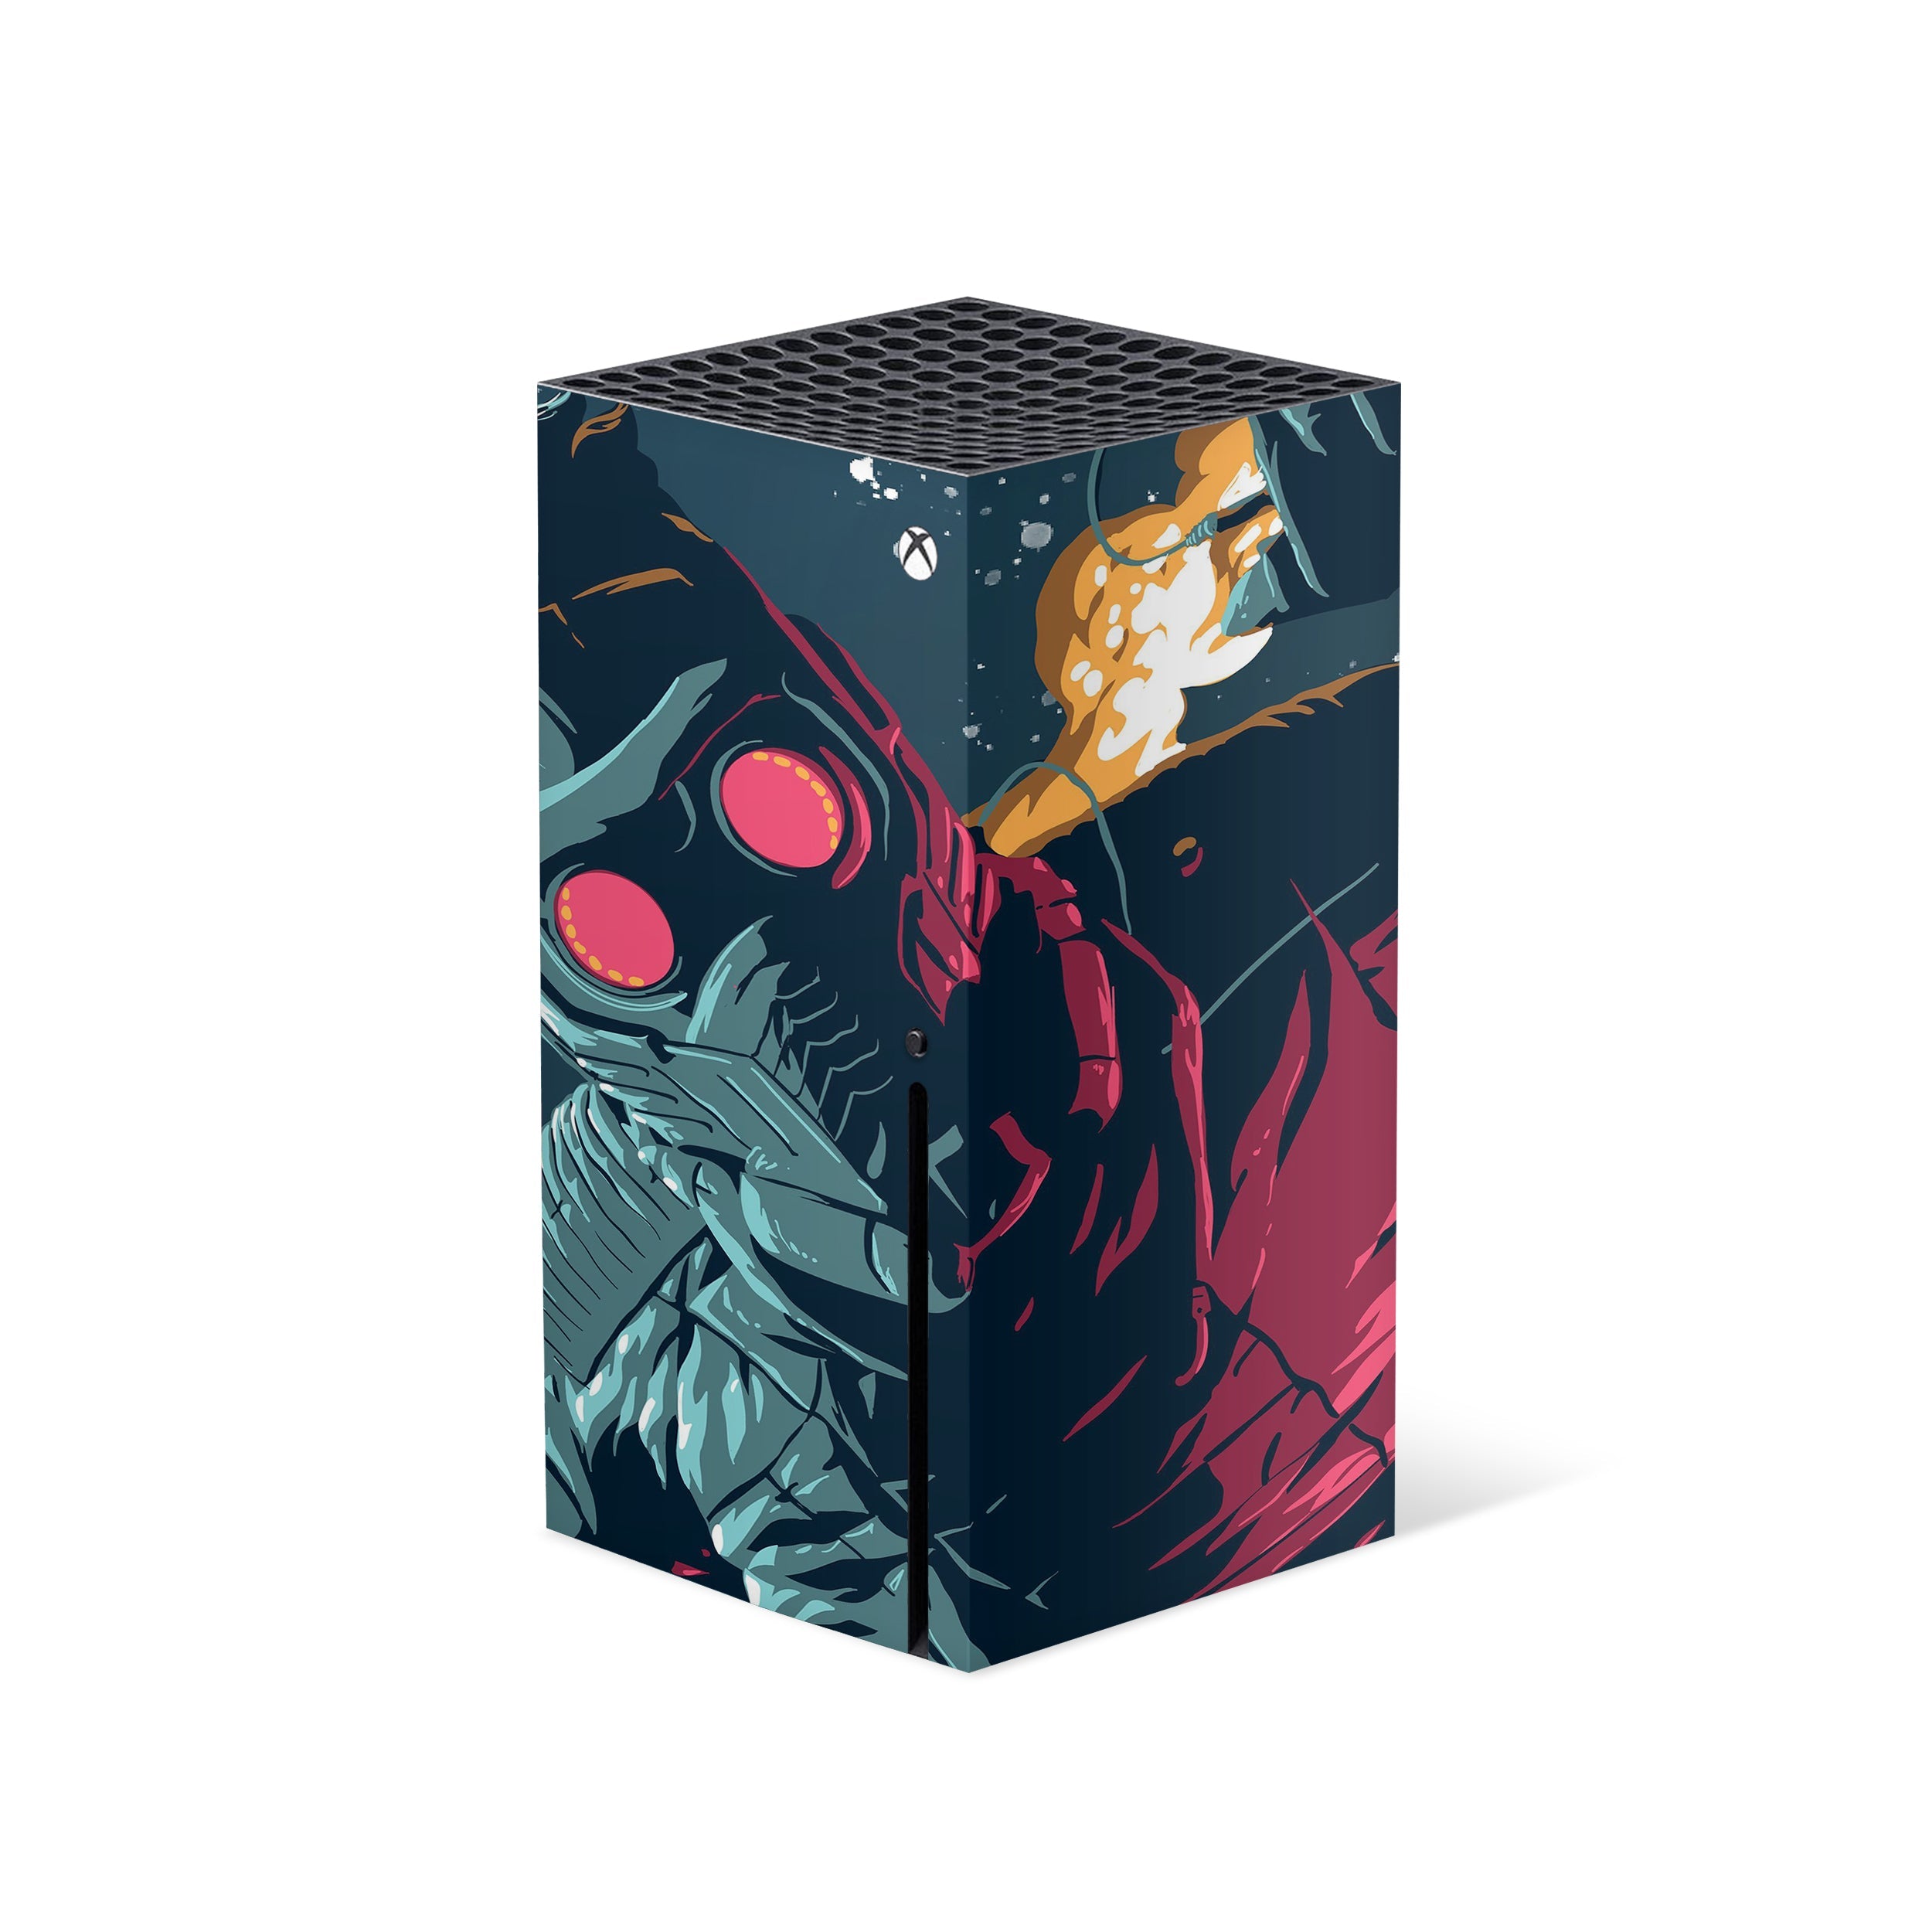 A video game skin featuring a Marvel Guardians of the Galaxy Star Lord design for the Xbox Series X.